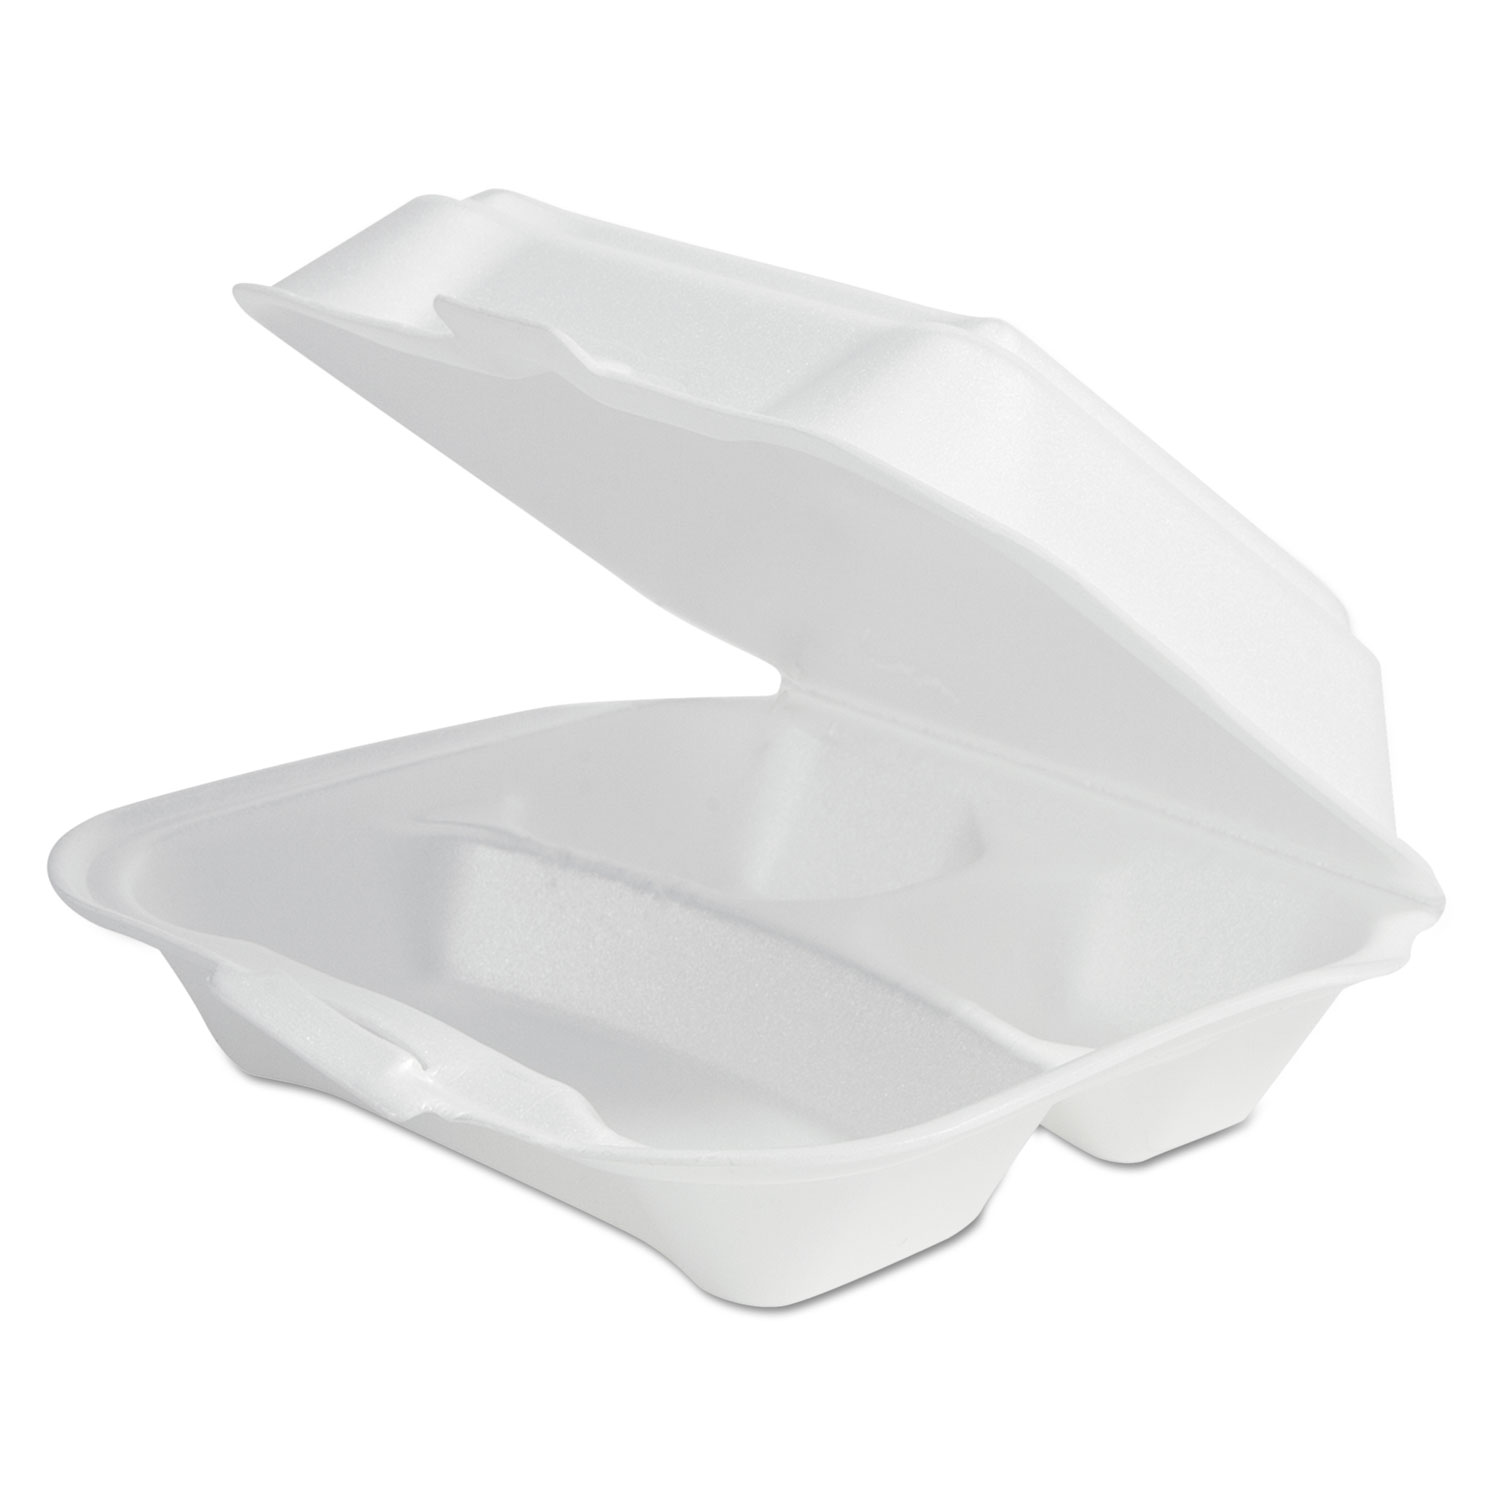 Double-Foam Food Containers, 8 x 8 x 3, White, 3-Compartment, 2/Carton